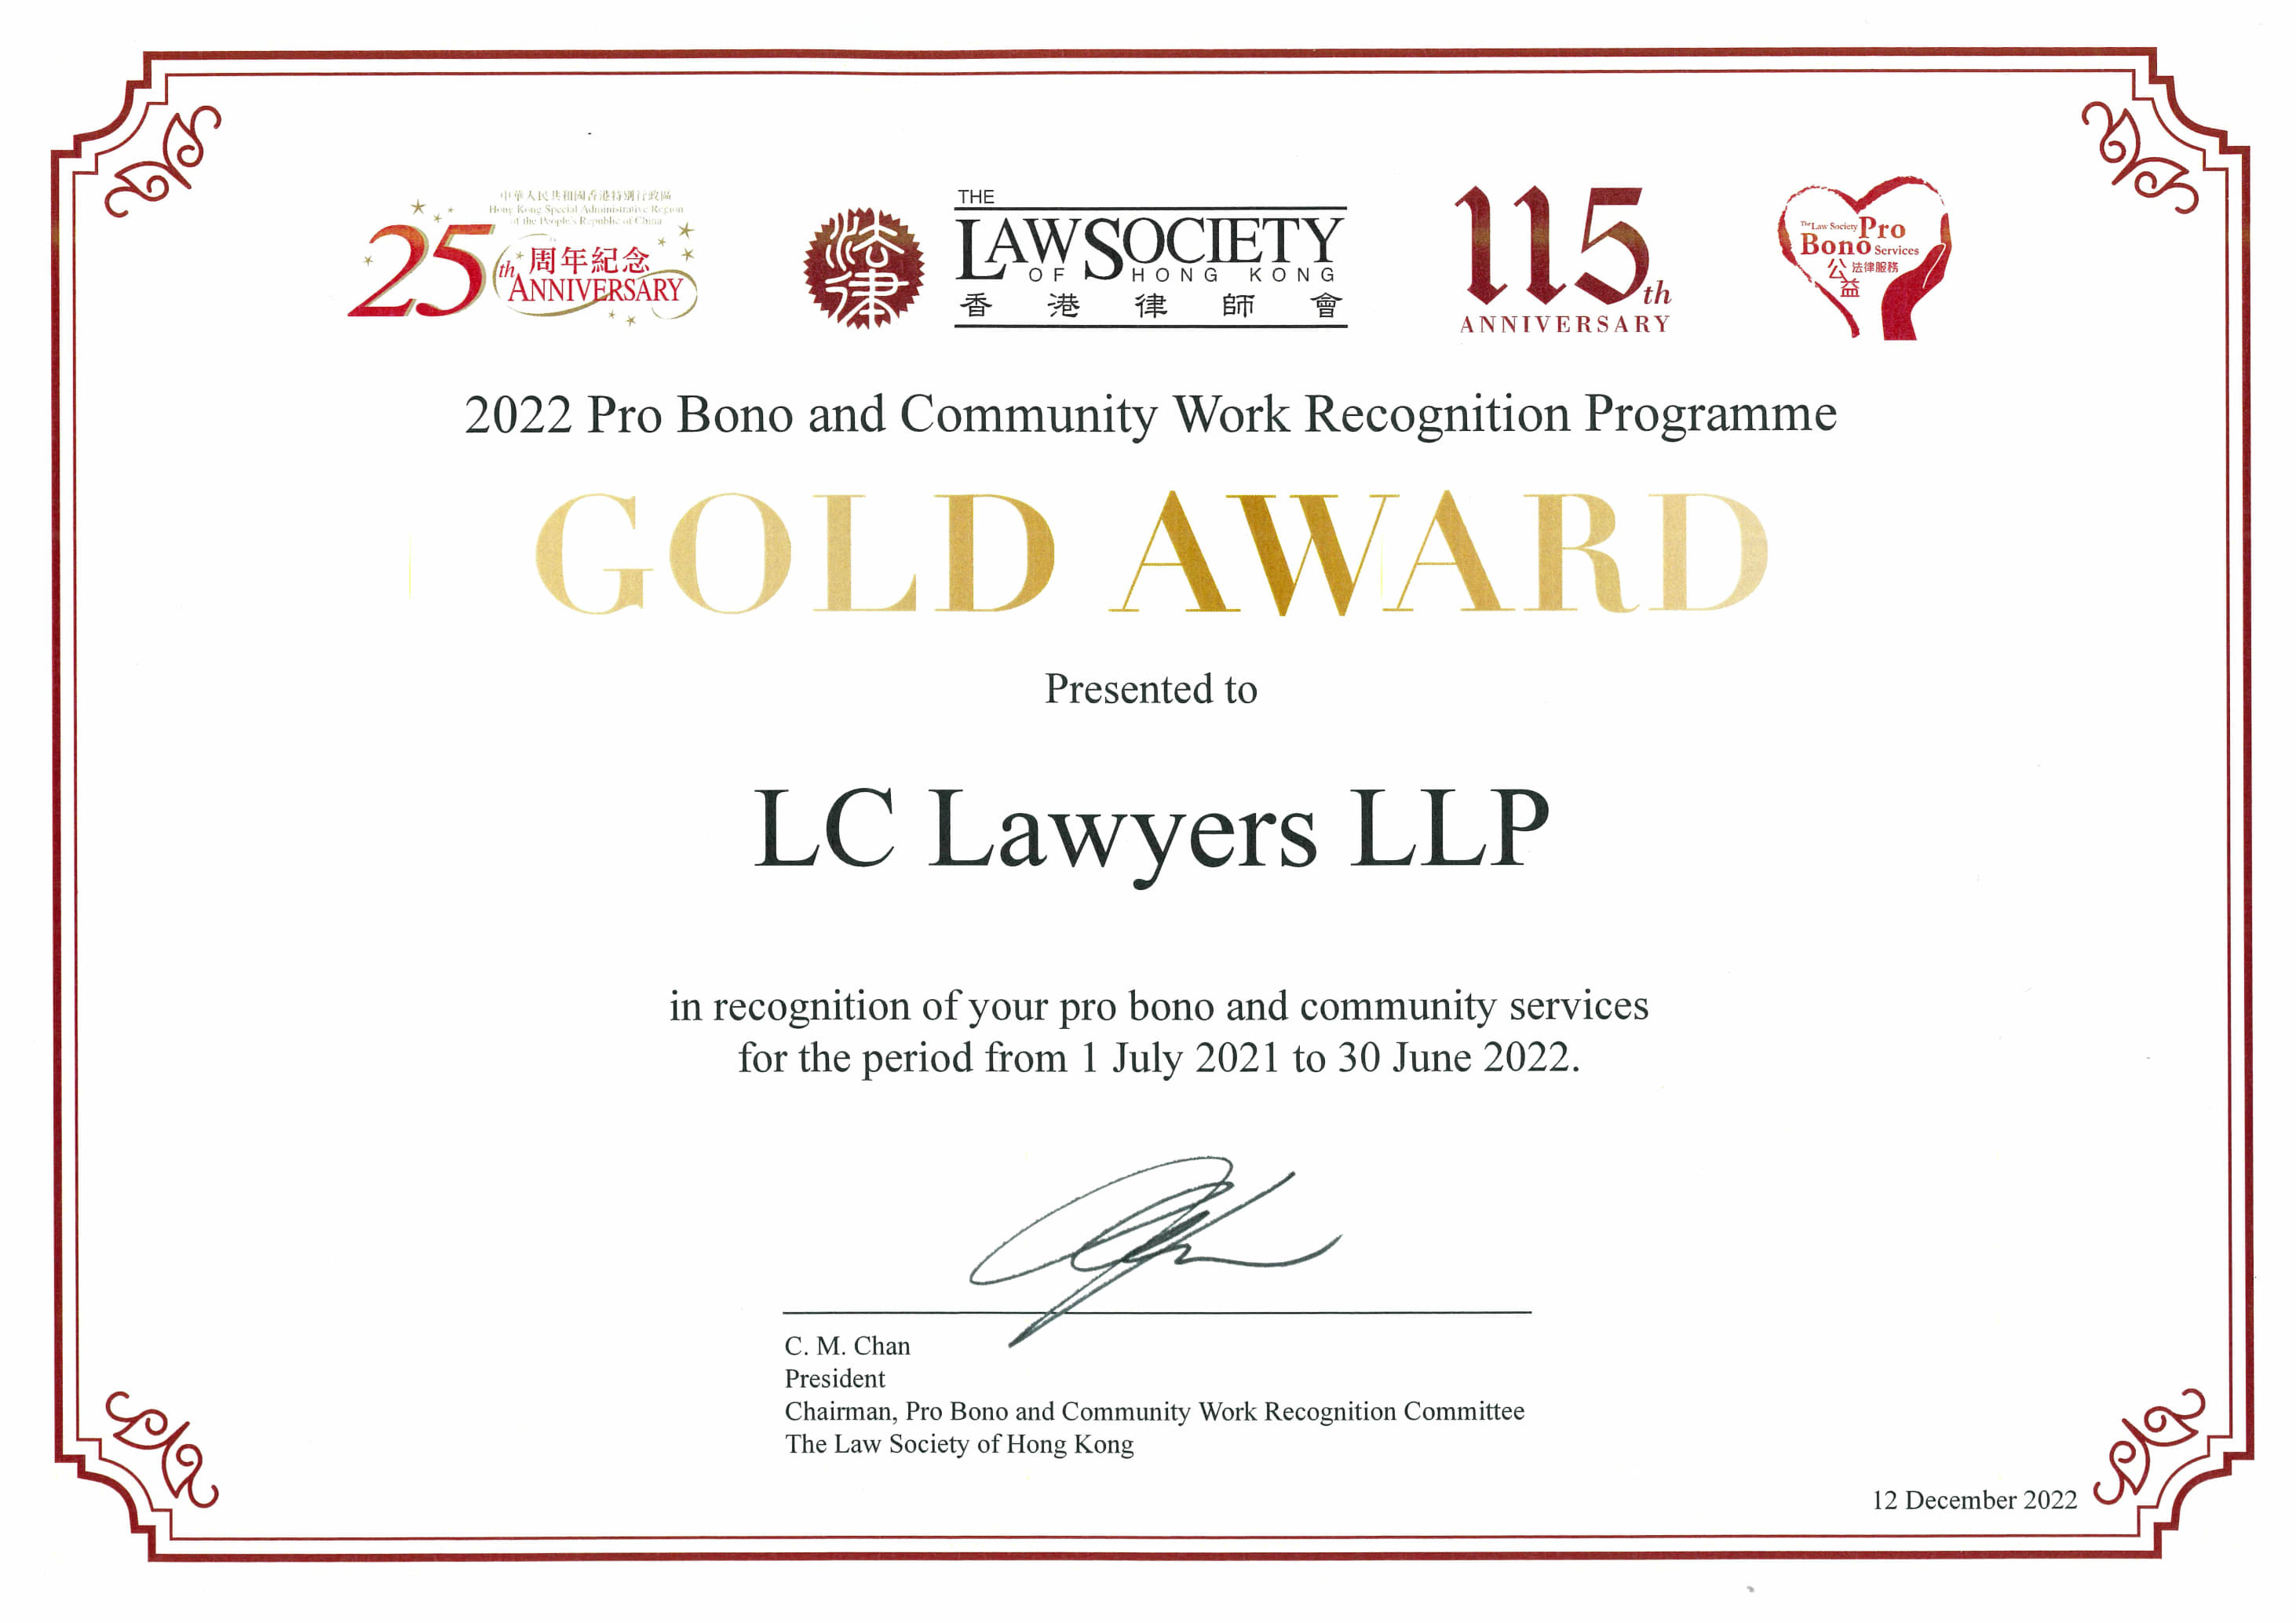 Gold Law Firm Award in Pro Bono Service by The Law Society of Hong Kong, 2022